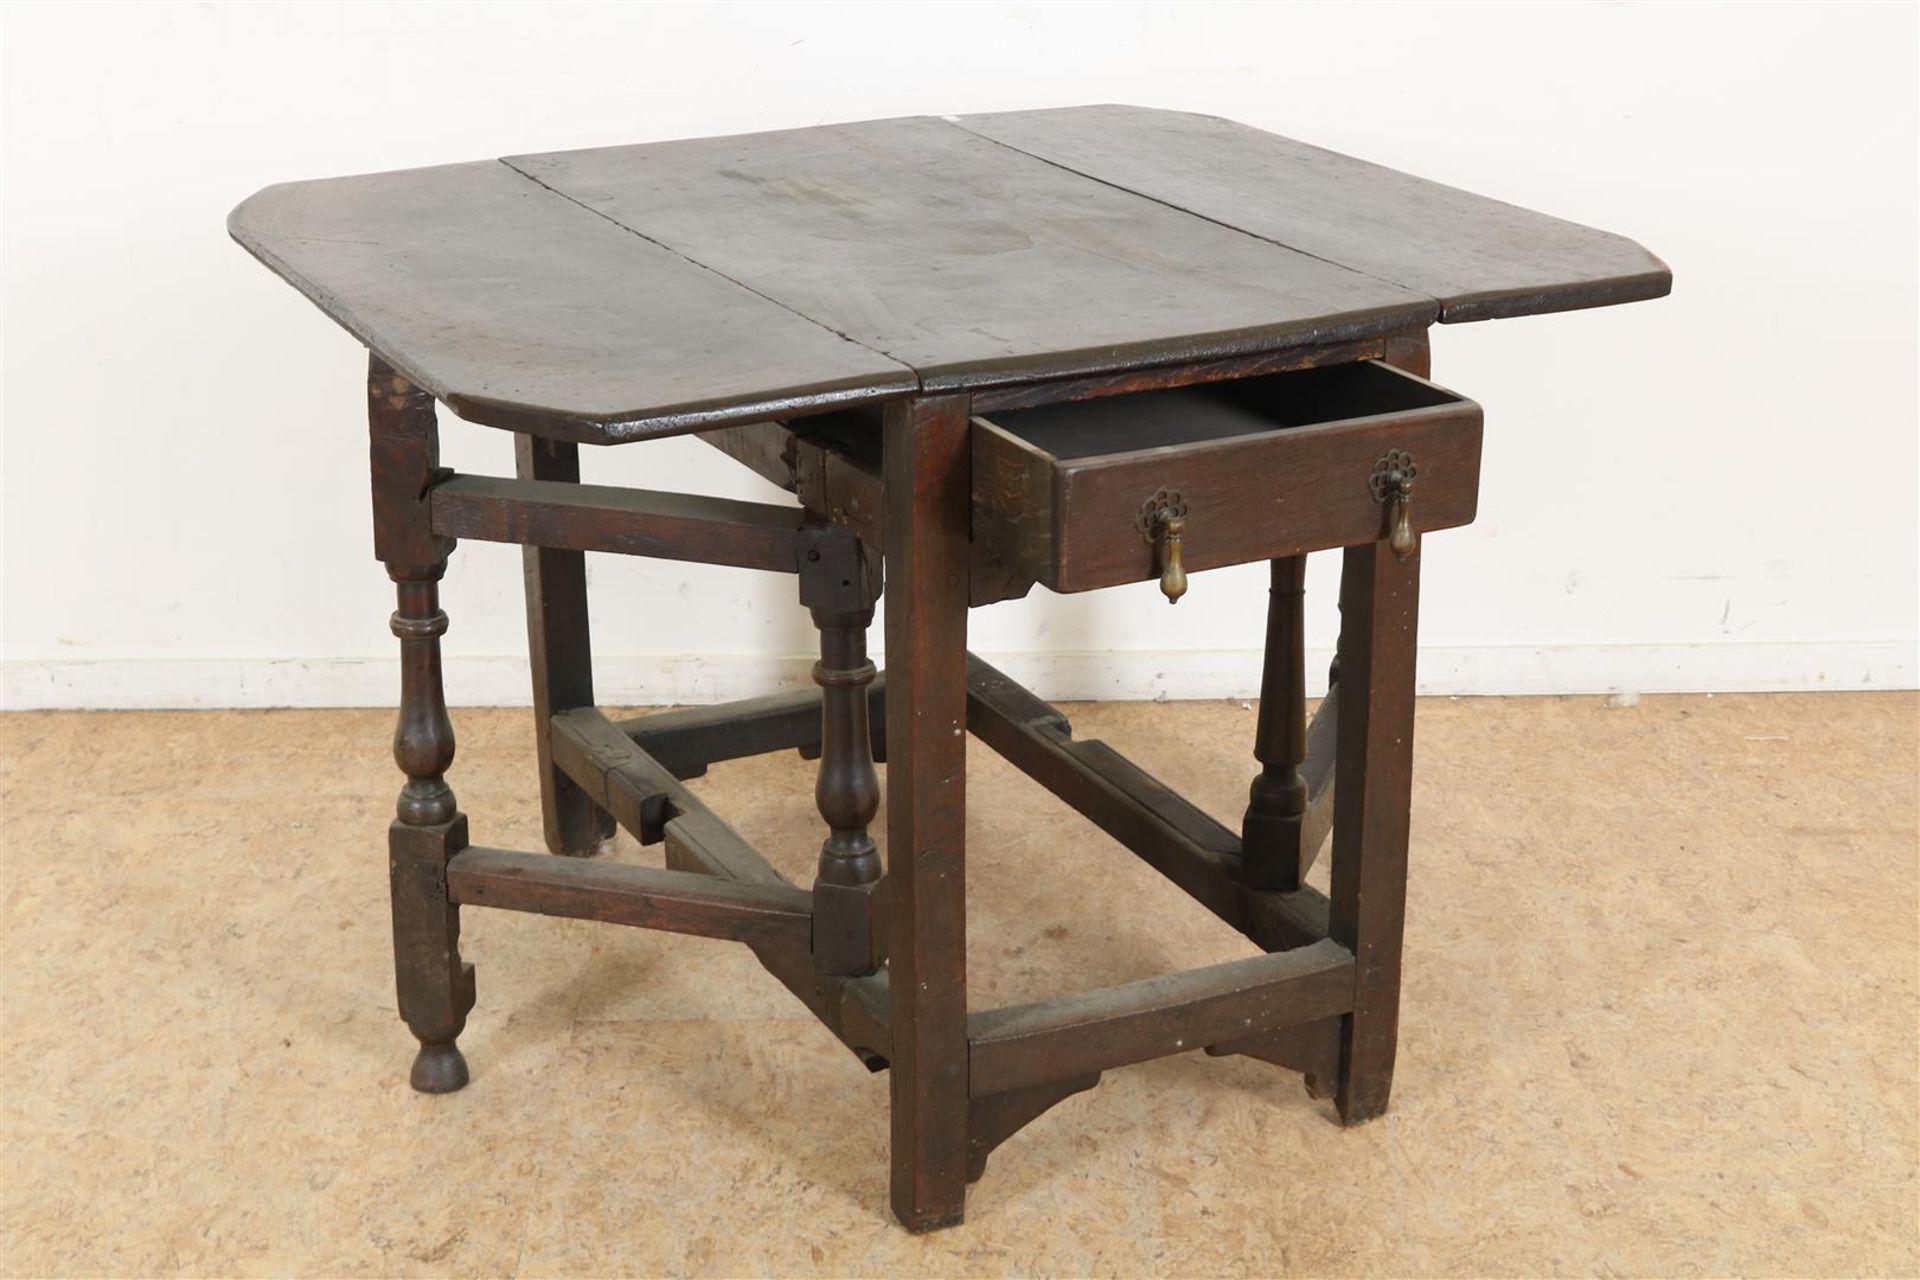 Oak Georgian gateleg table with 2 side leaves and 2 side drawers, England early 18th century, h. 70, - Image 2 of 3